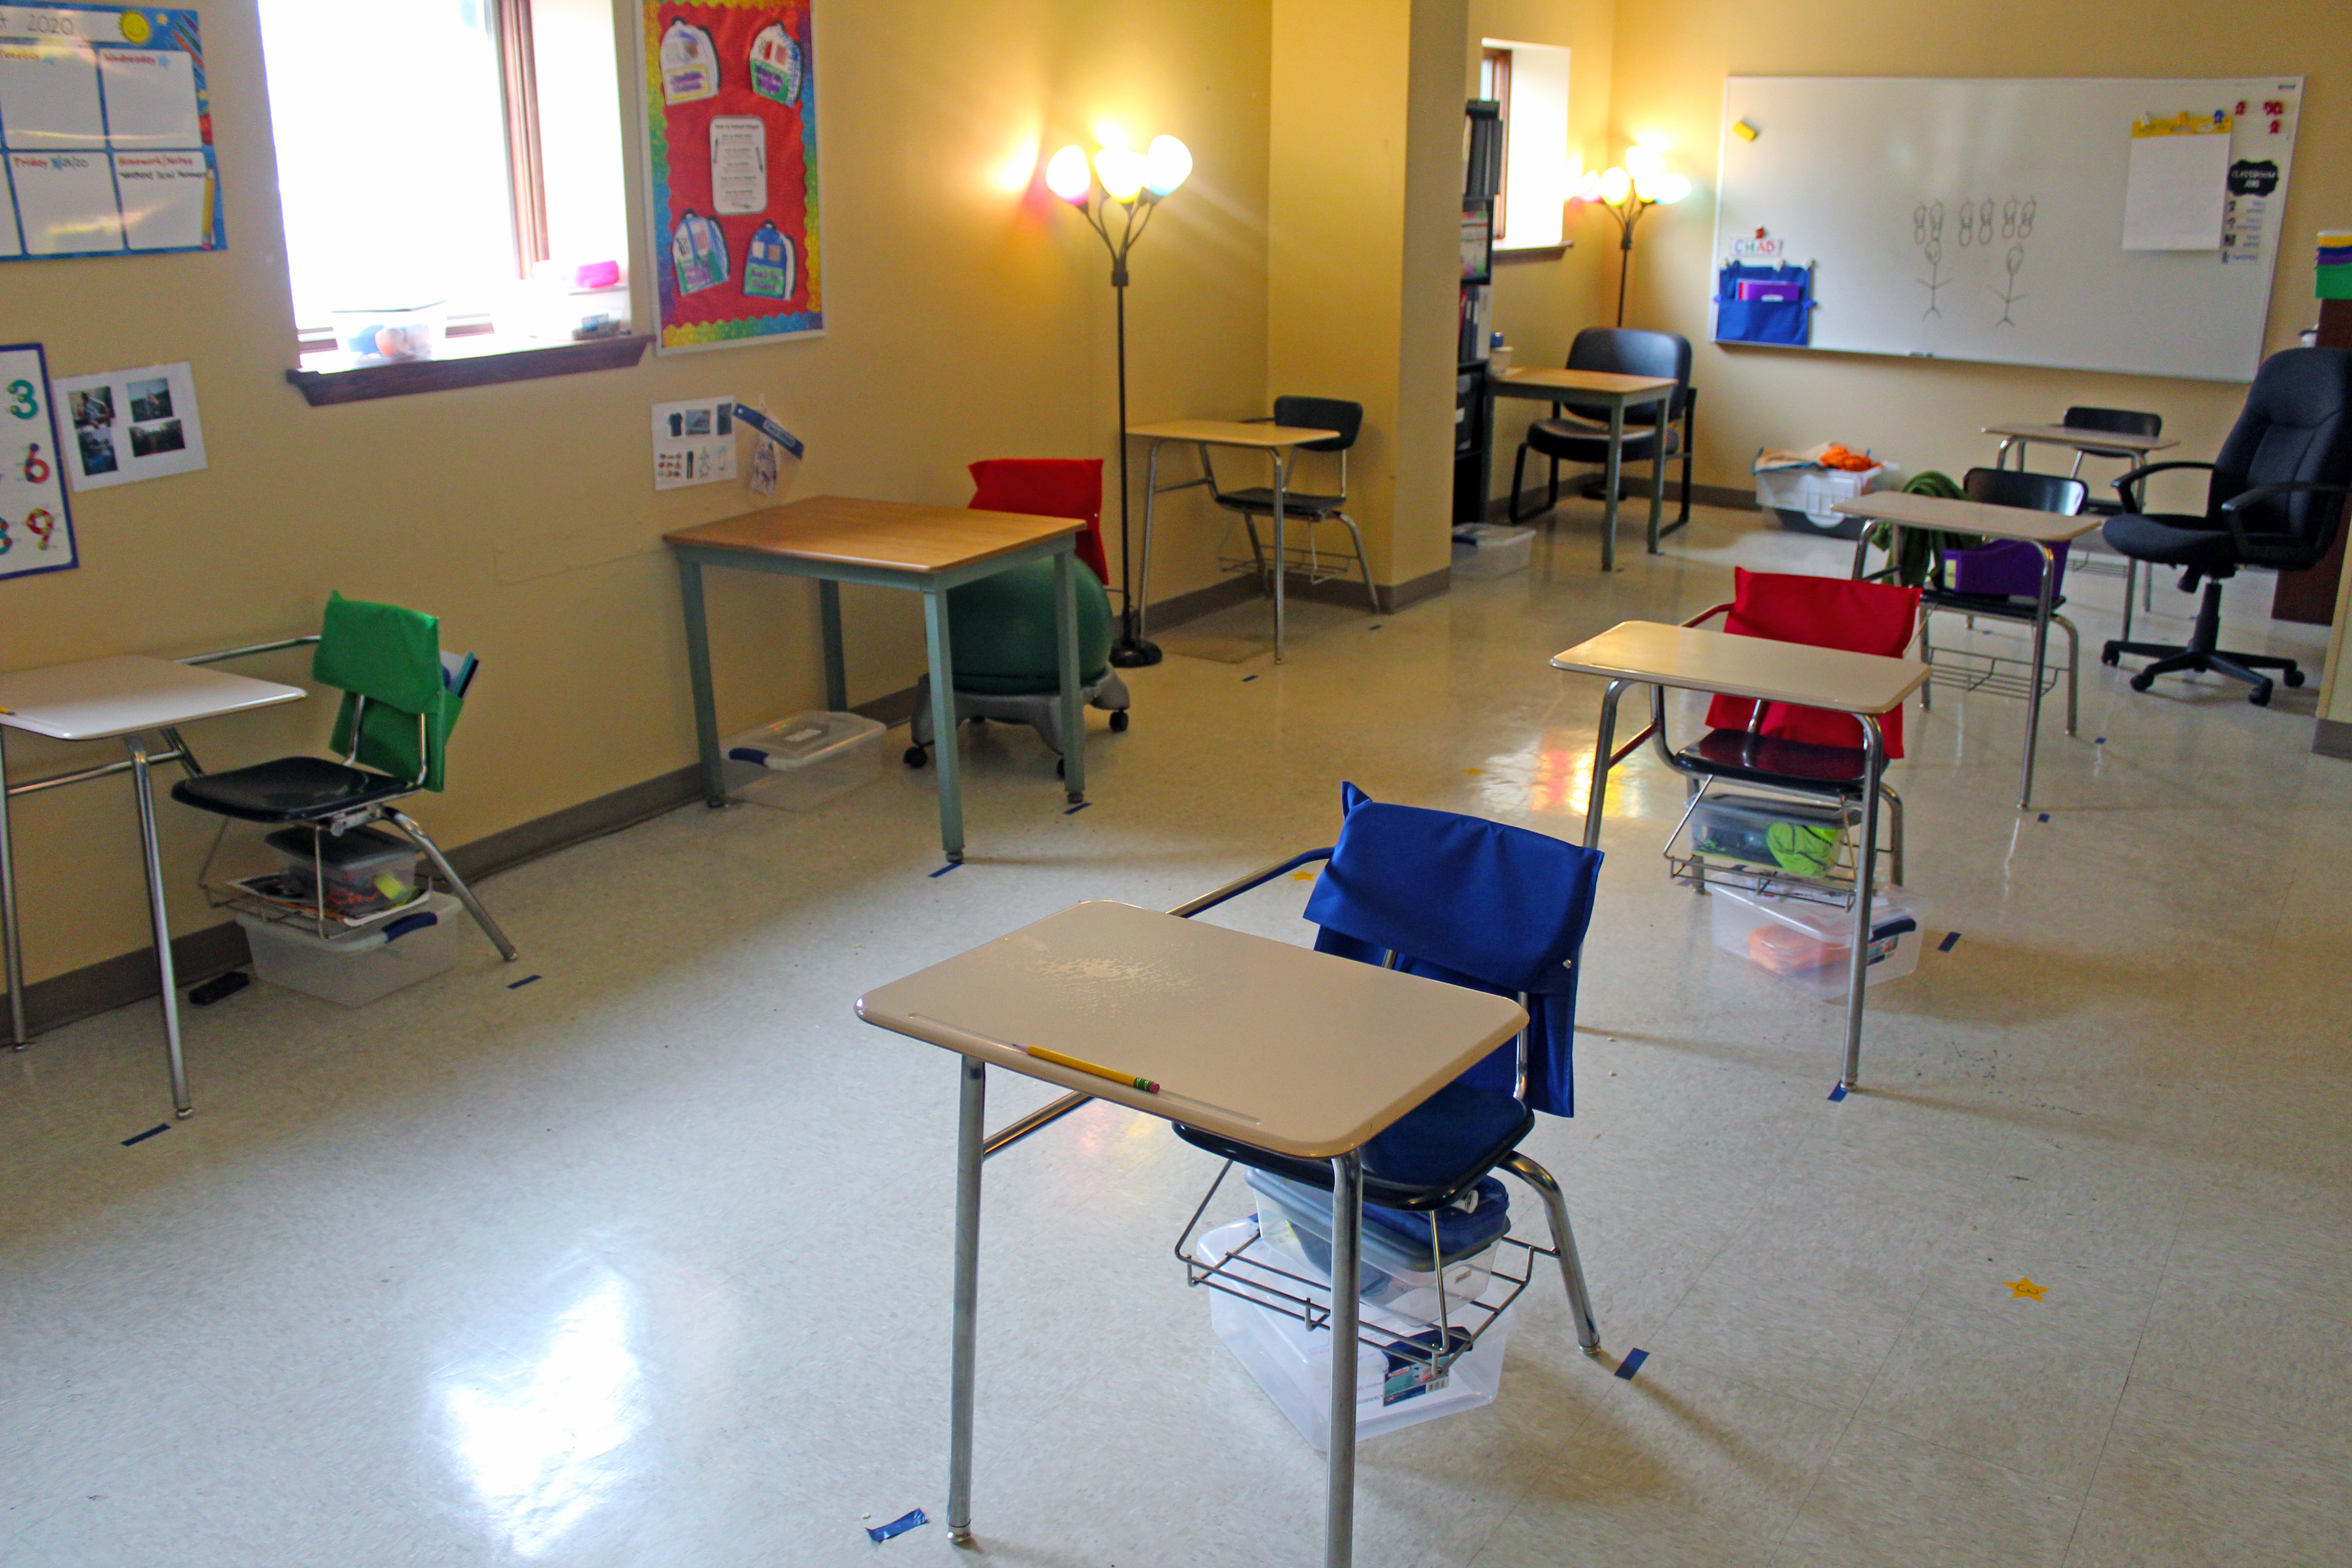 covid-safety-preparations-new-story-schools-indiana-4